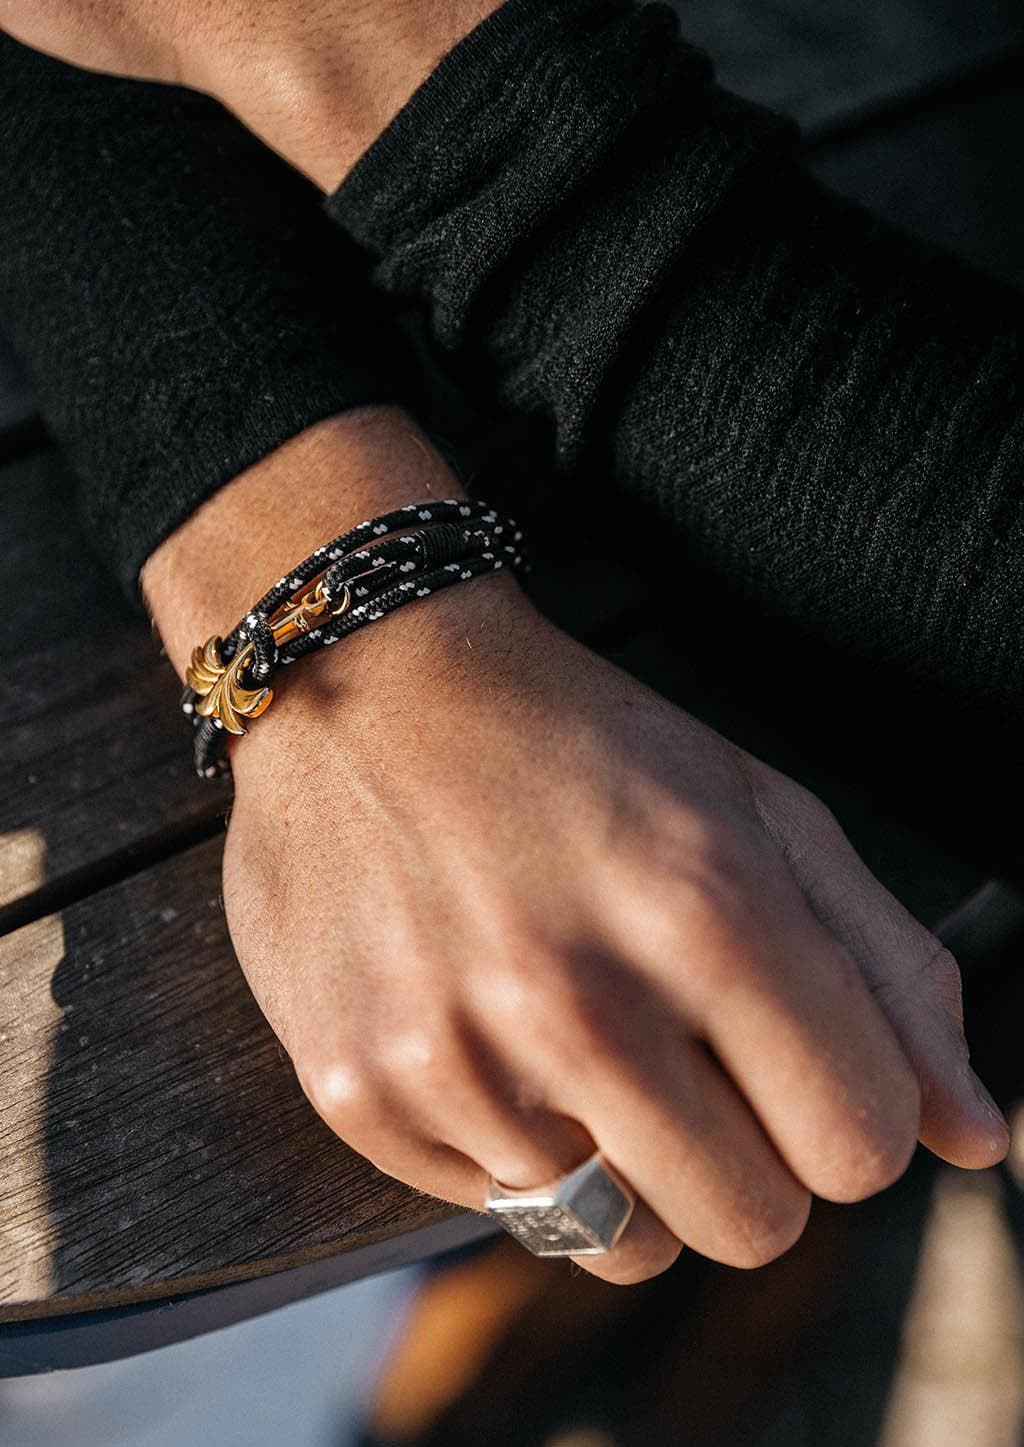 Trophy - Triple - Season two Palm anchor bracelet with black and white nylon band. With black sweater.